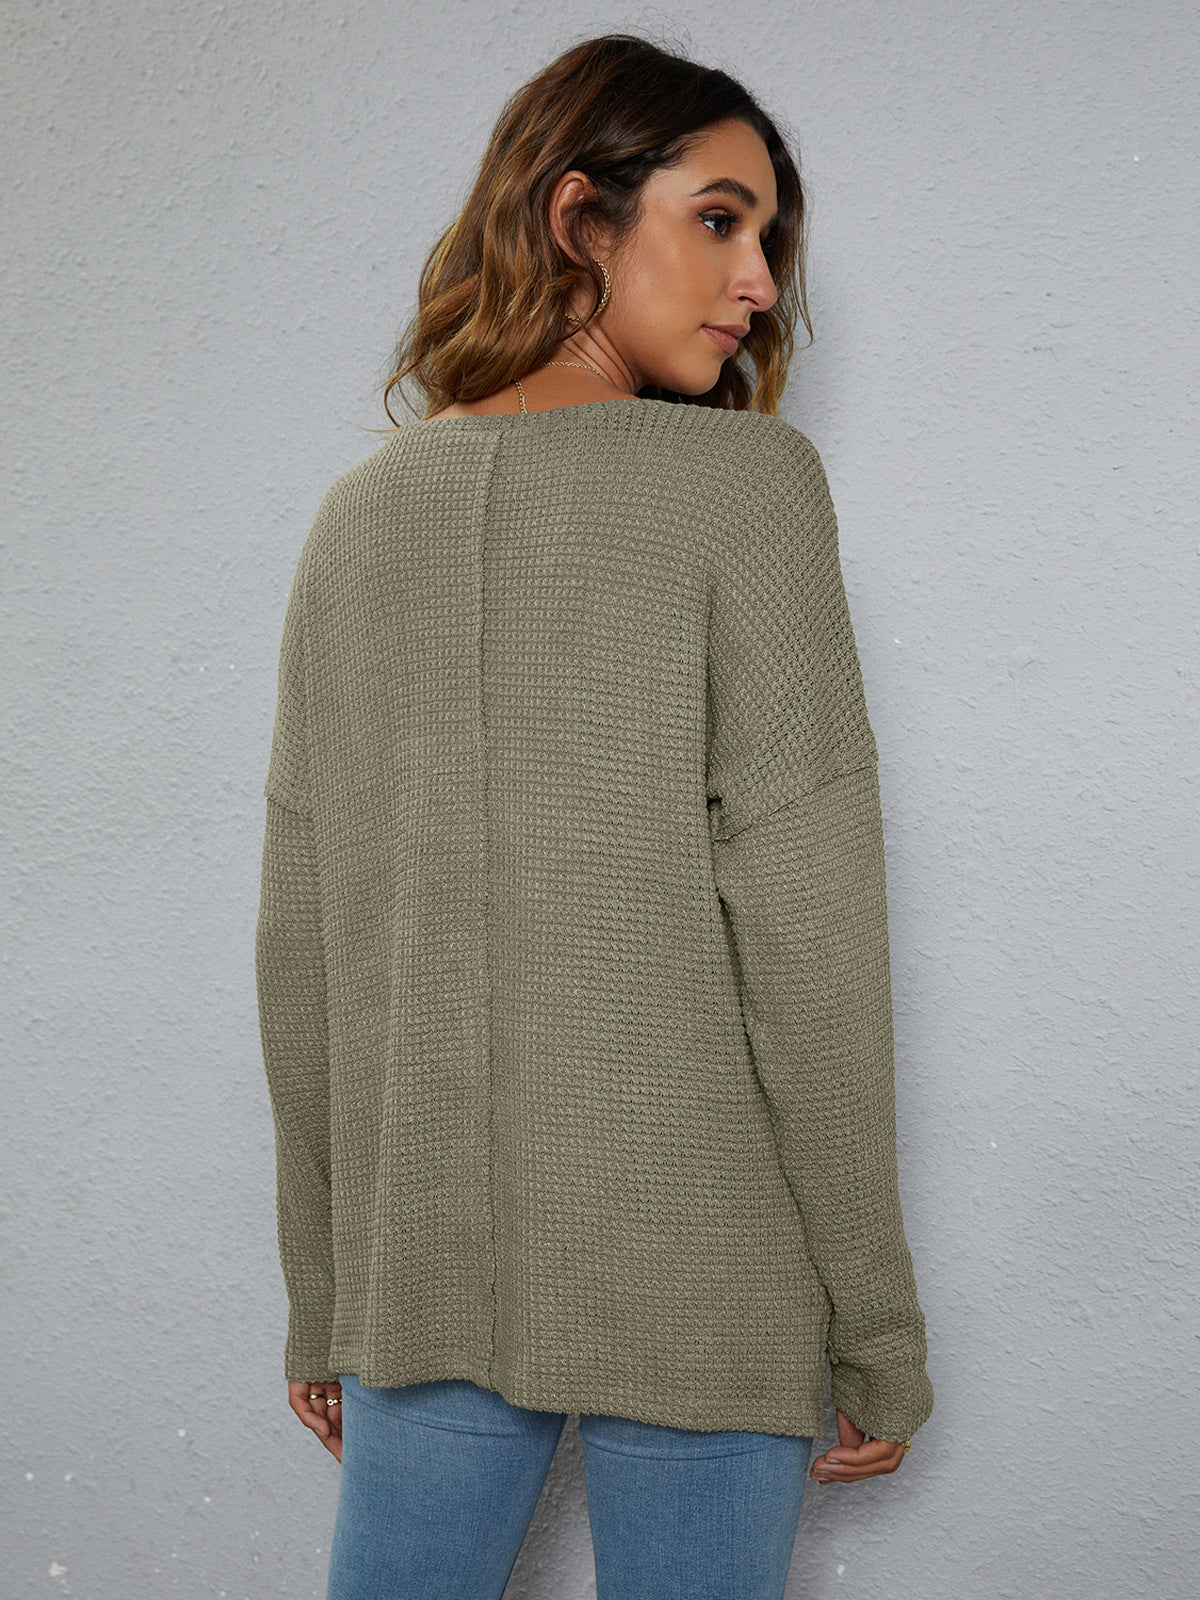 Top High-Low Waffle-Knit Sweater